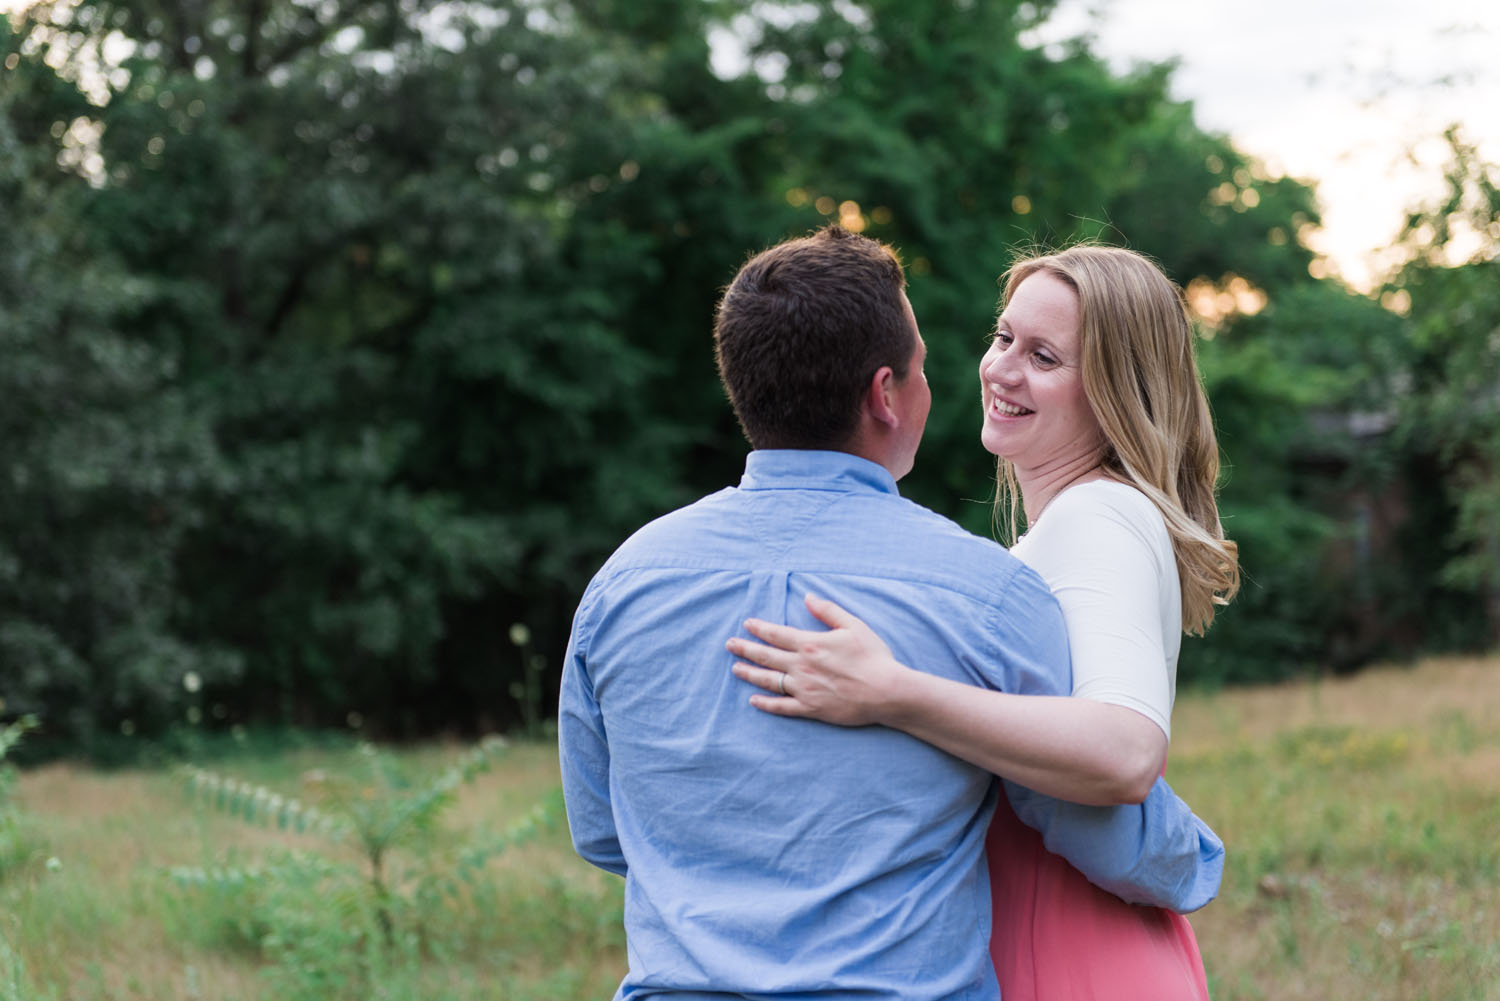 Nick + Kristen | Woodsy Belmont Summer Maternity Session | Boston and New England Portrait Photography | Lorna Stell Photo